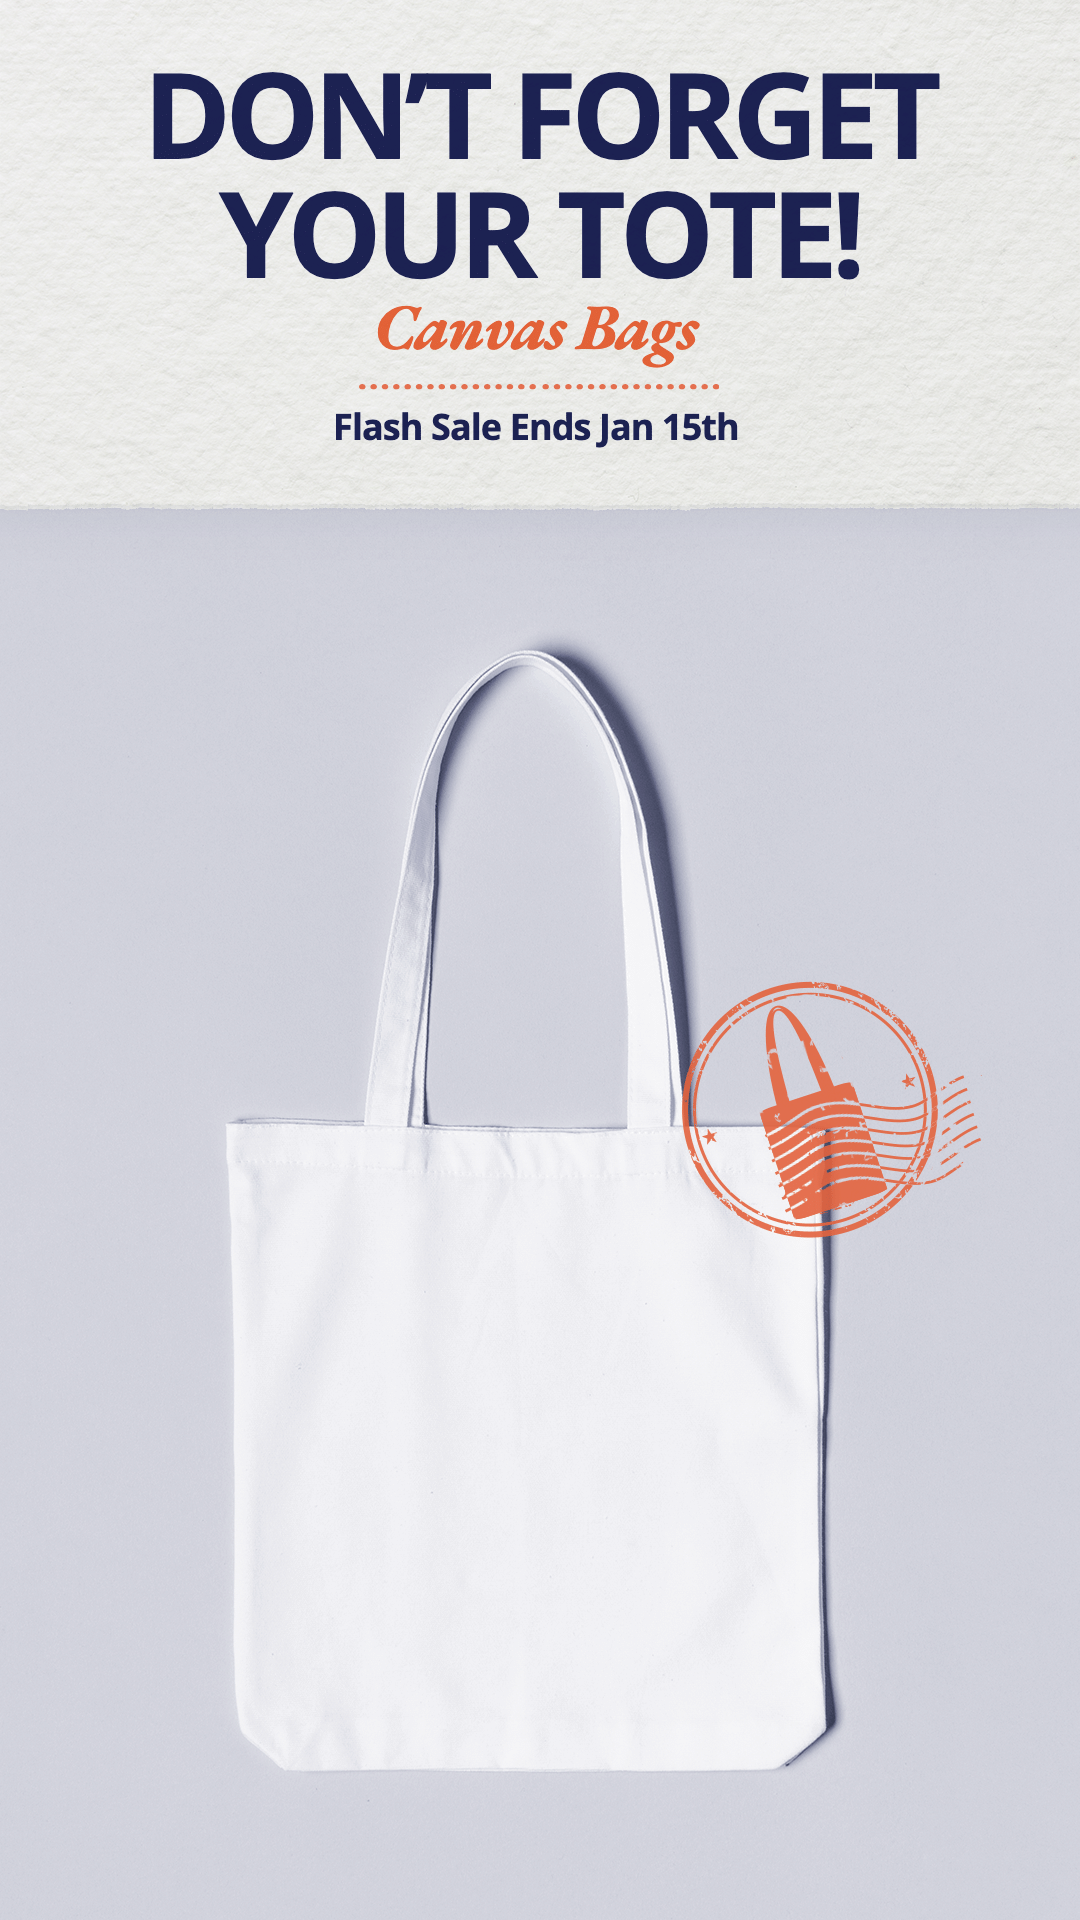 Canvas Tote Regular Promotion Ecommerce Story